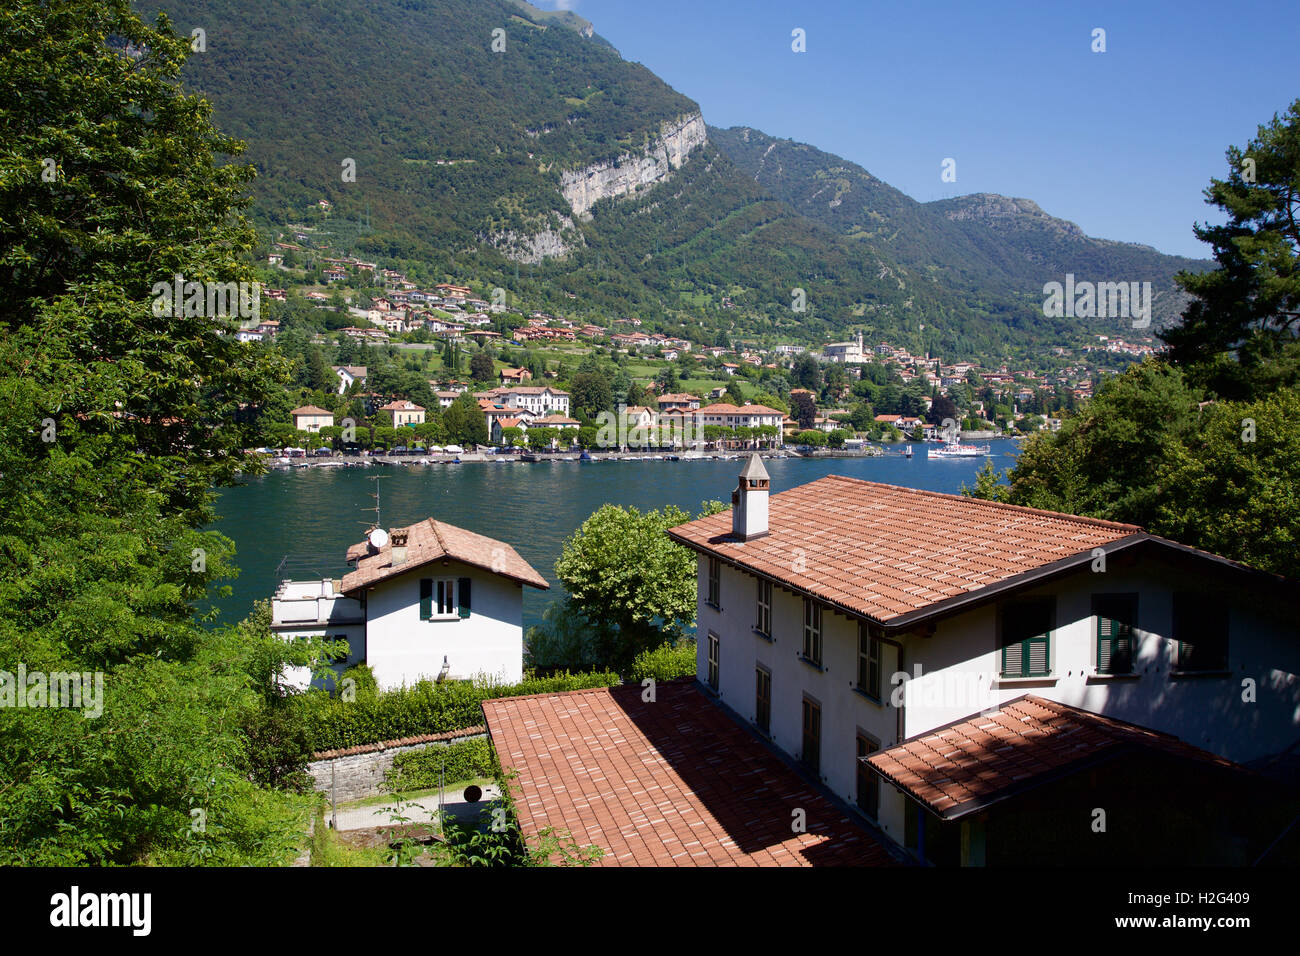 View across the lake from high up at Lake Como Italy at Lenno on lakeside with mountain in background Stock Photo